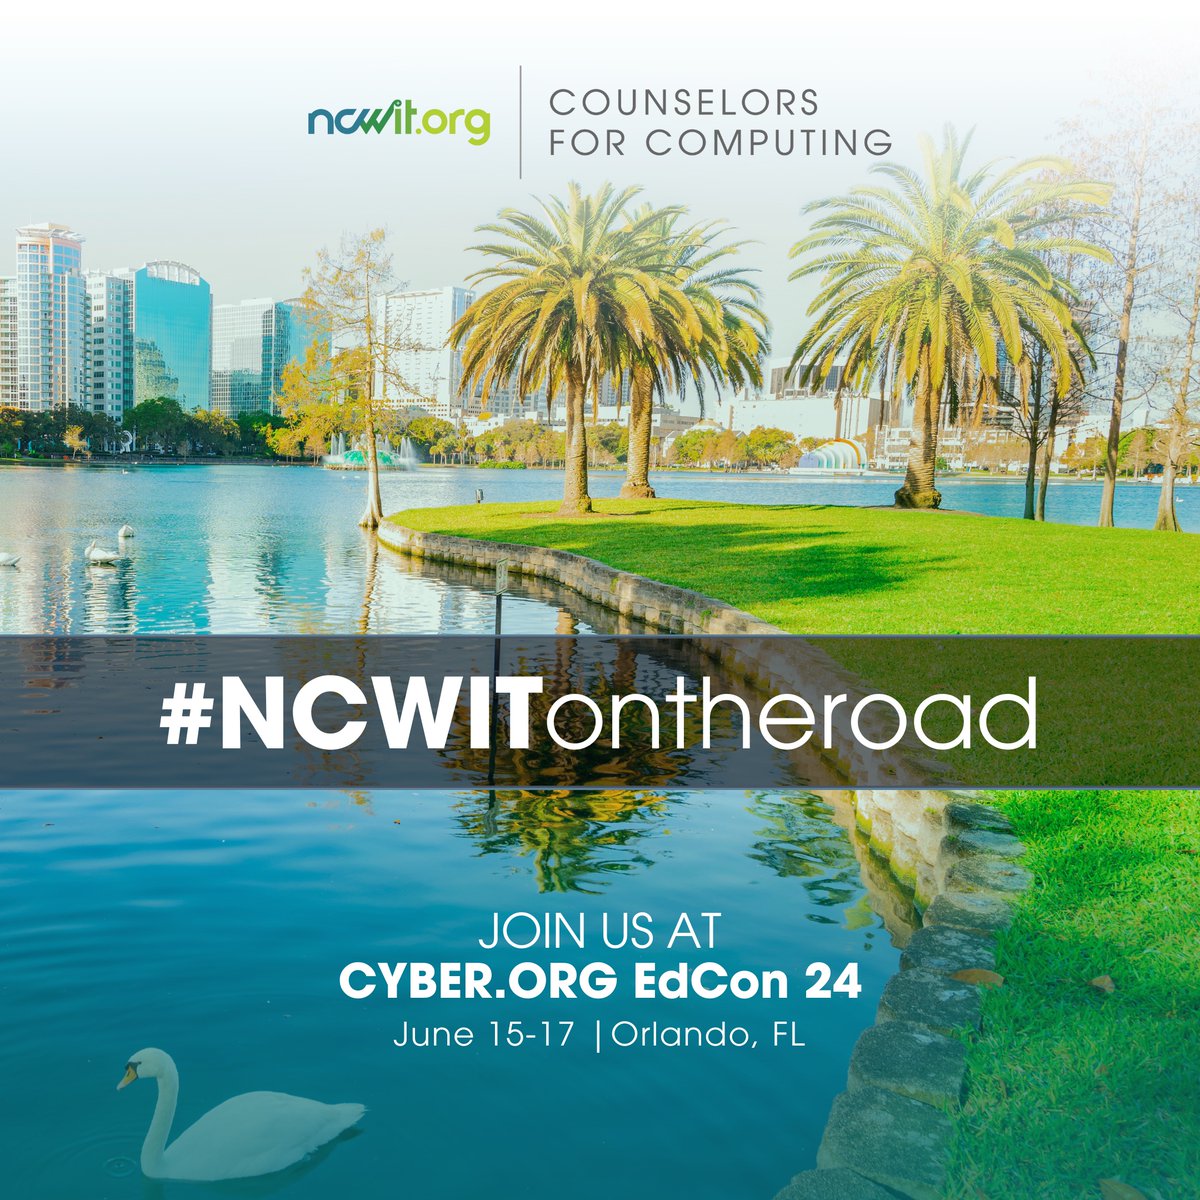 Just 1️⃣ month until #NCWITontheroad arrives at @cyber_dot_org EdCon 24 in Orlando!

Join us for:

🖍️ K-5 Early Foundations

👩🏻 Boosting CS with Counselors

🦺 Digital Safety

🔮 Future-Ready Pathways

Learn more: ncwit.org/event/ncwitc4c…

Register here: bit.ly/cyberedcon24